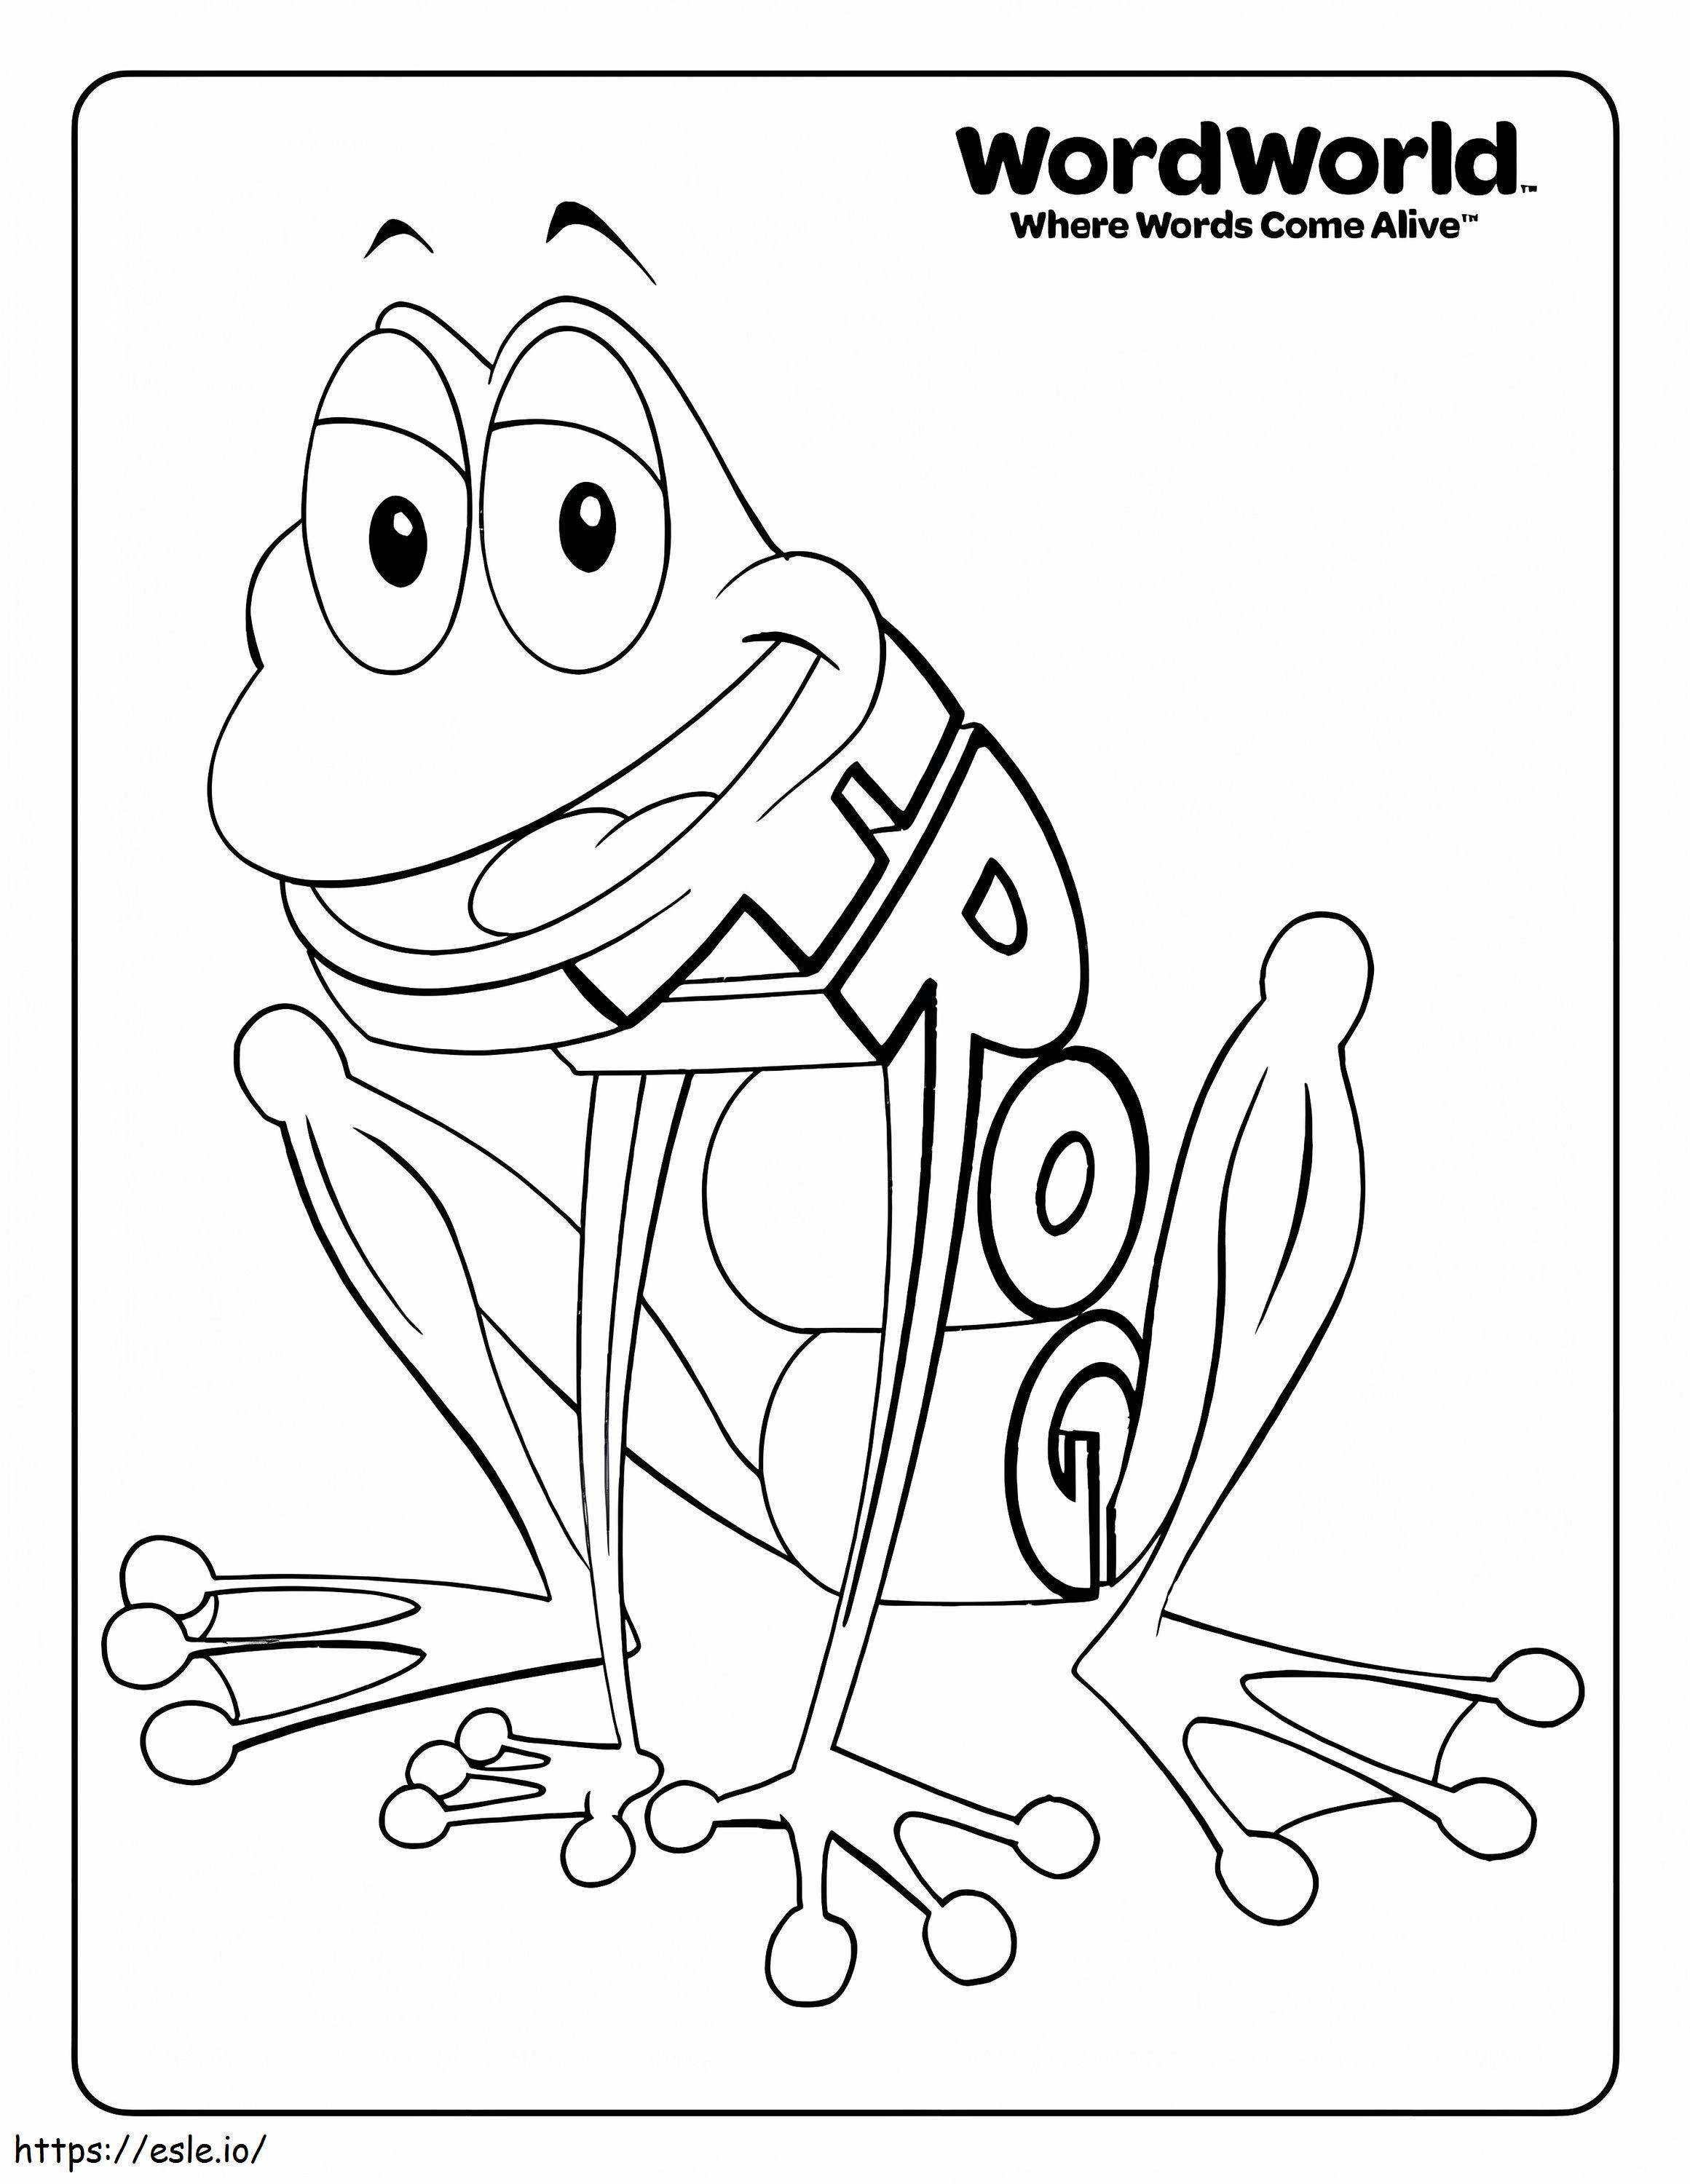 1583139218 Ww Frog coloring page